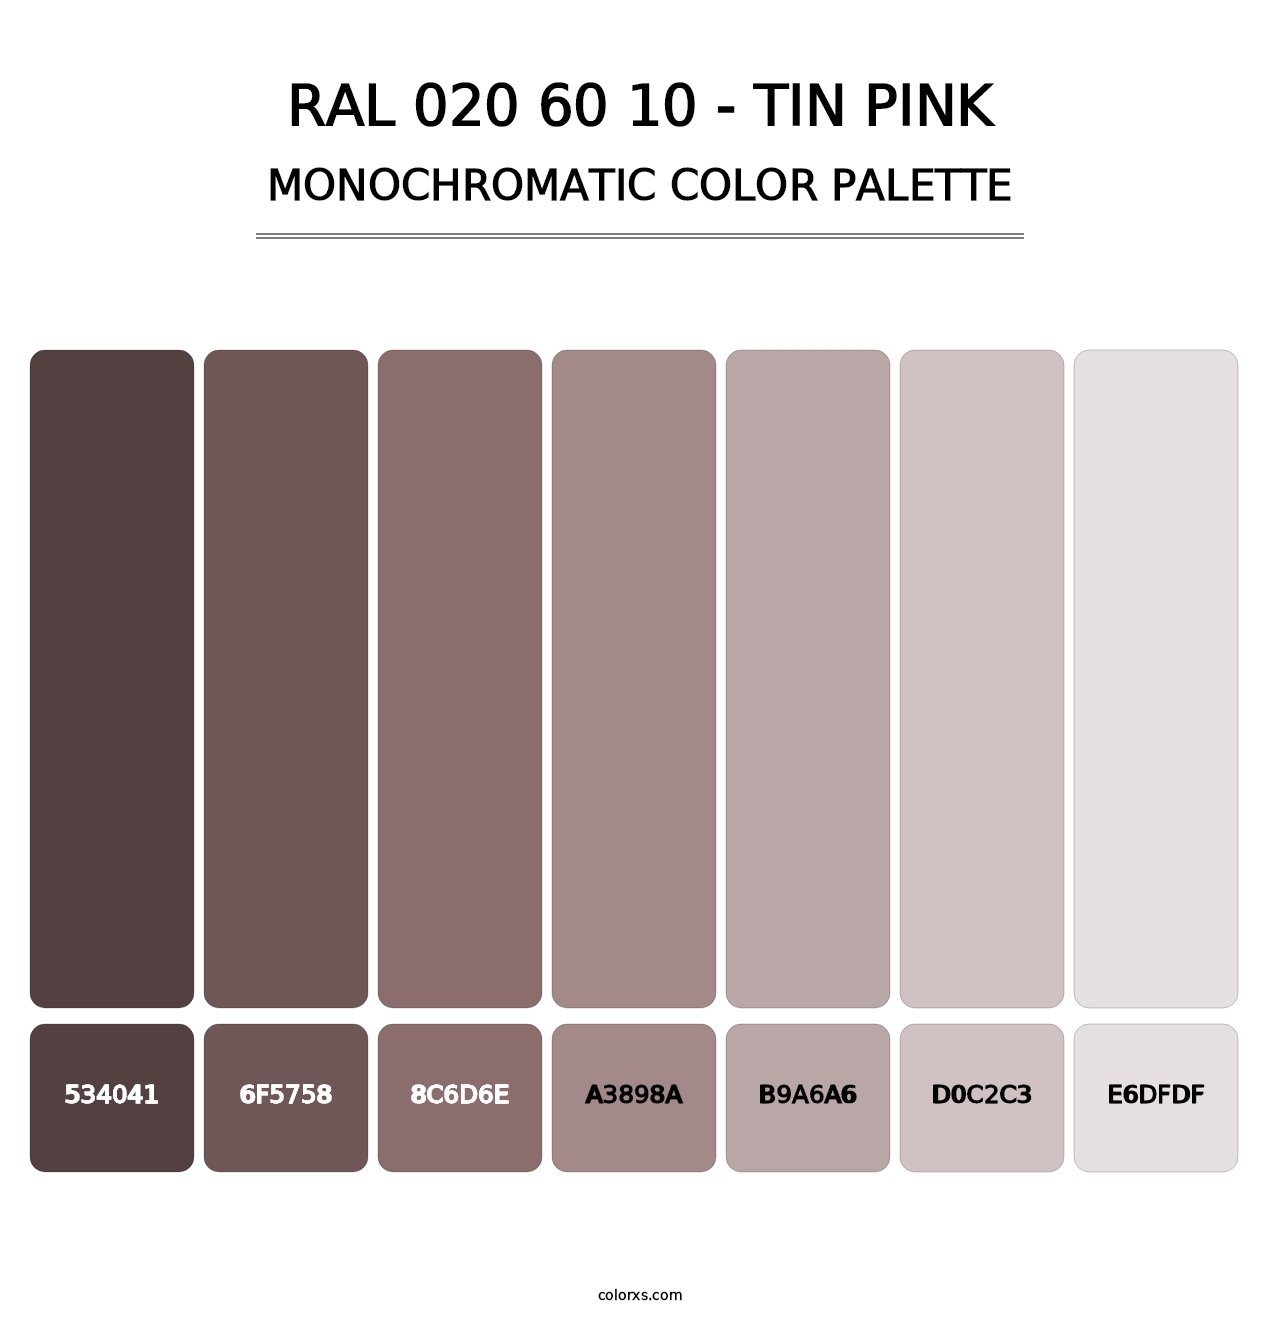 RAL 020 60 10 - Tin Pink - Monochromatic Color Palette